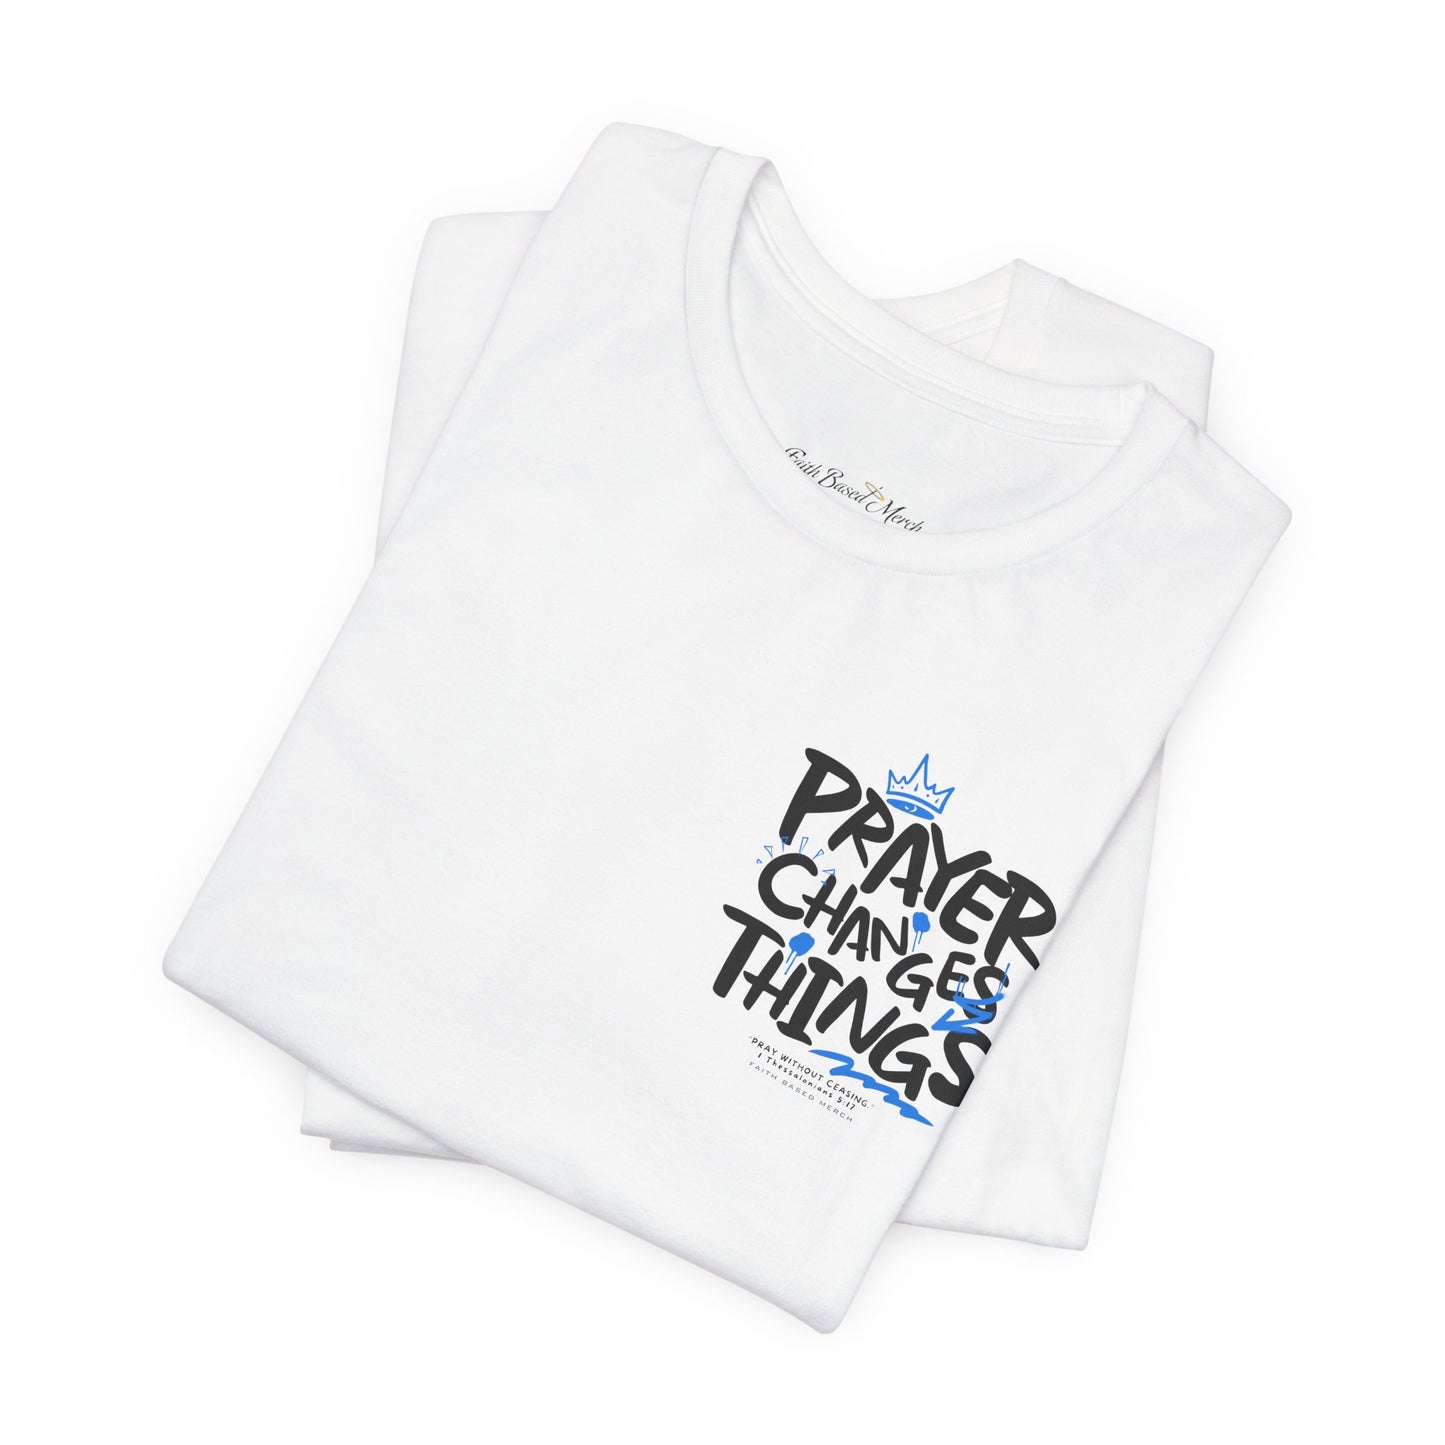 Prayer Changes Things T-Shirt (Double-Sided) - White